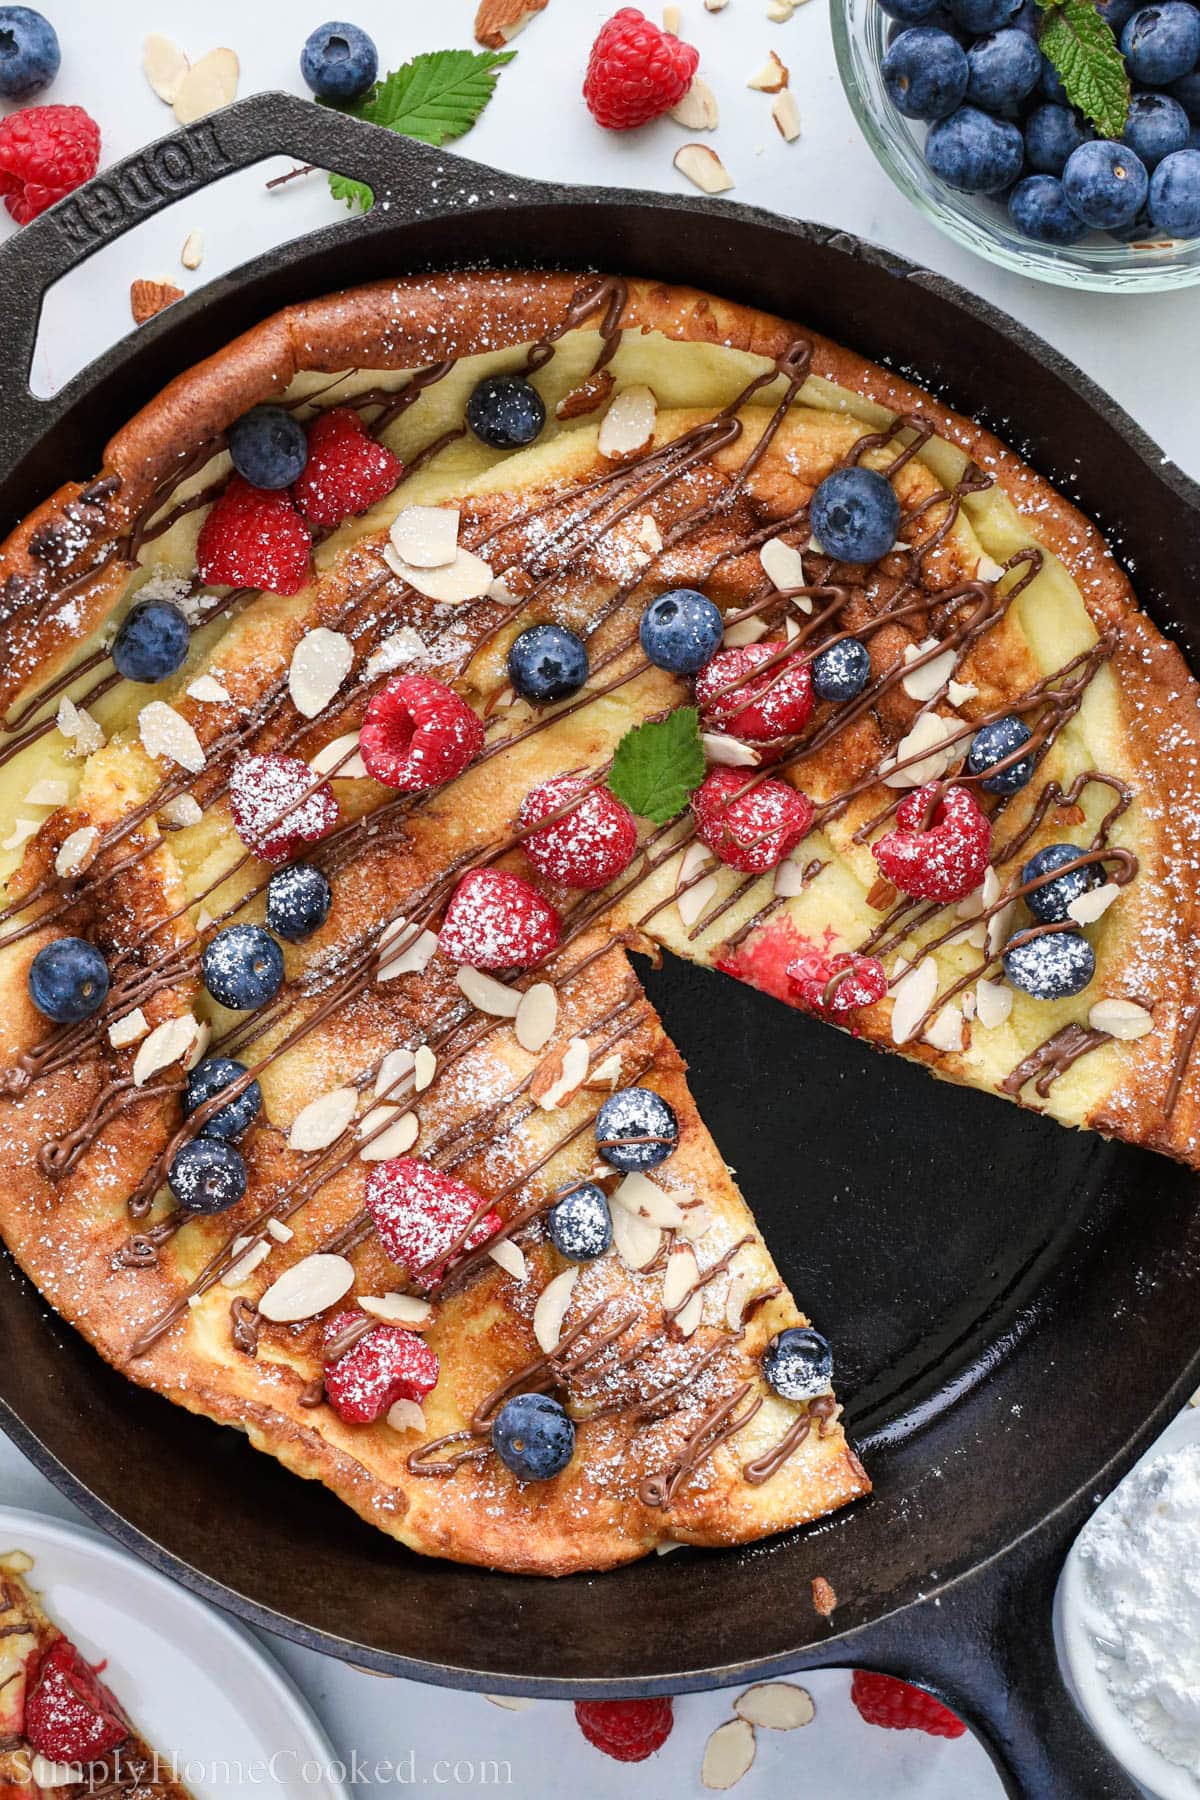 German Pancake in a cast iron skillet topped with Nutella, sliced almonds, berries, and powdered sugar, one slice missing.